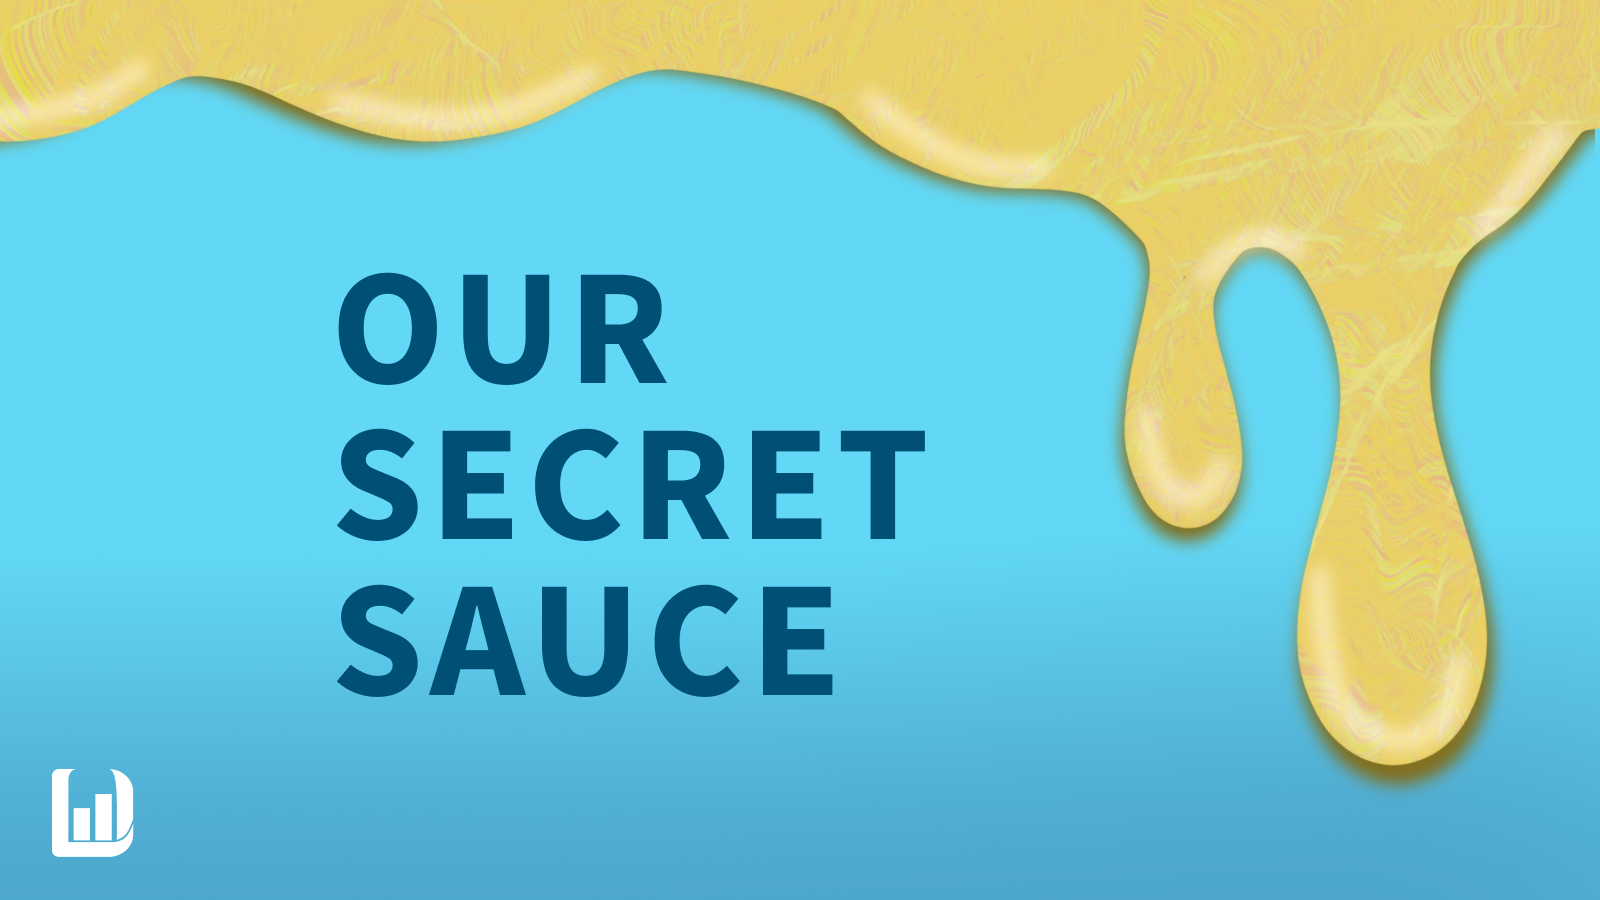 Yellow sauce drips from top onto blue background that reads our secret sauce.